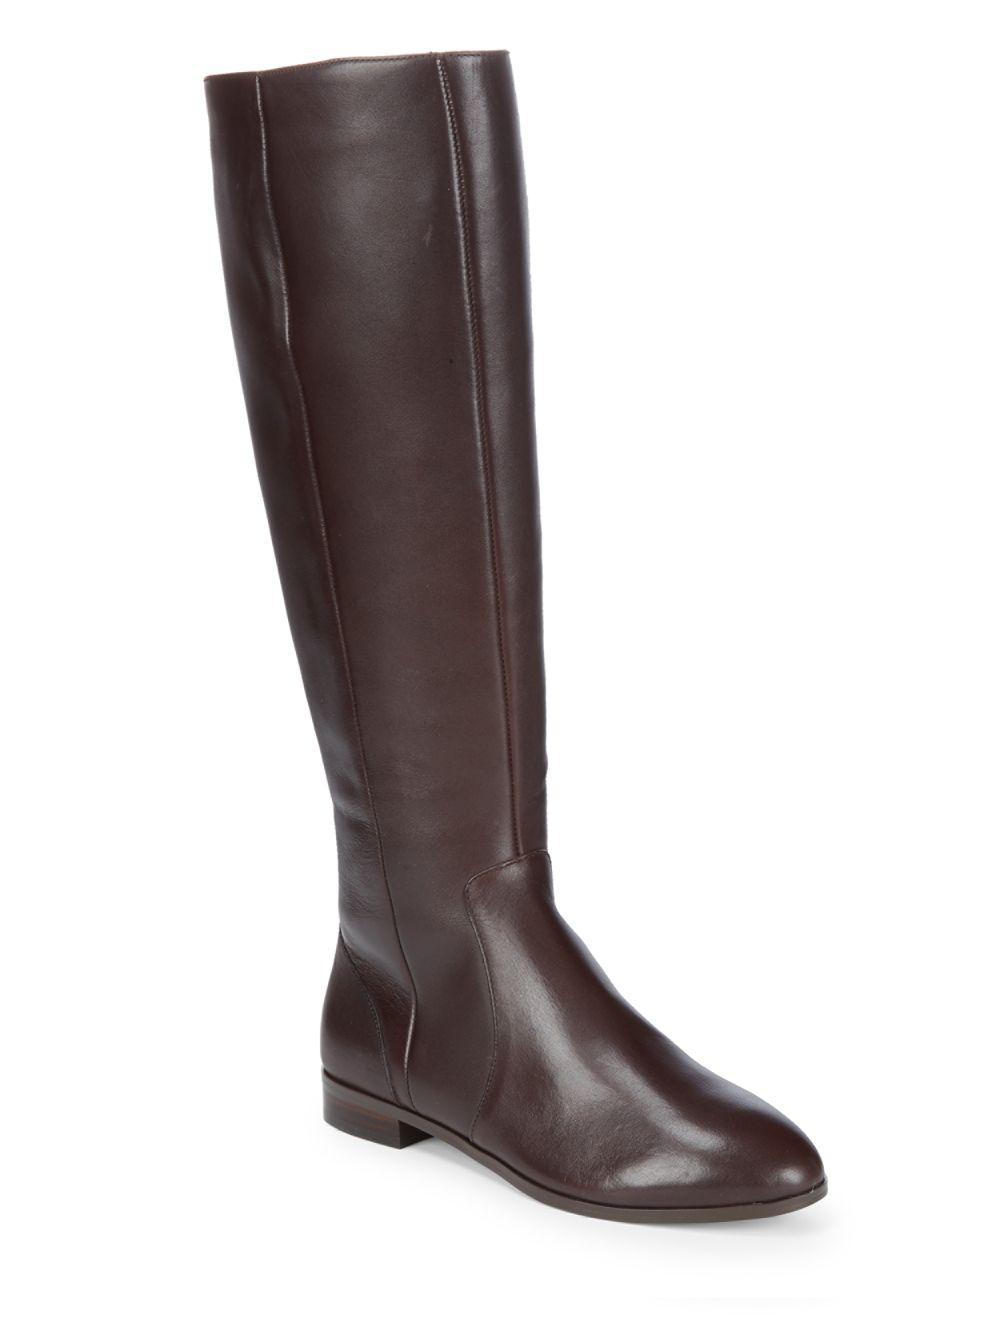 Saks Fifth Avenue Leather Robin Knee-high Boots in Brown - Lyst